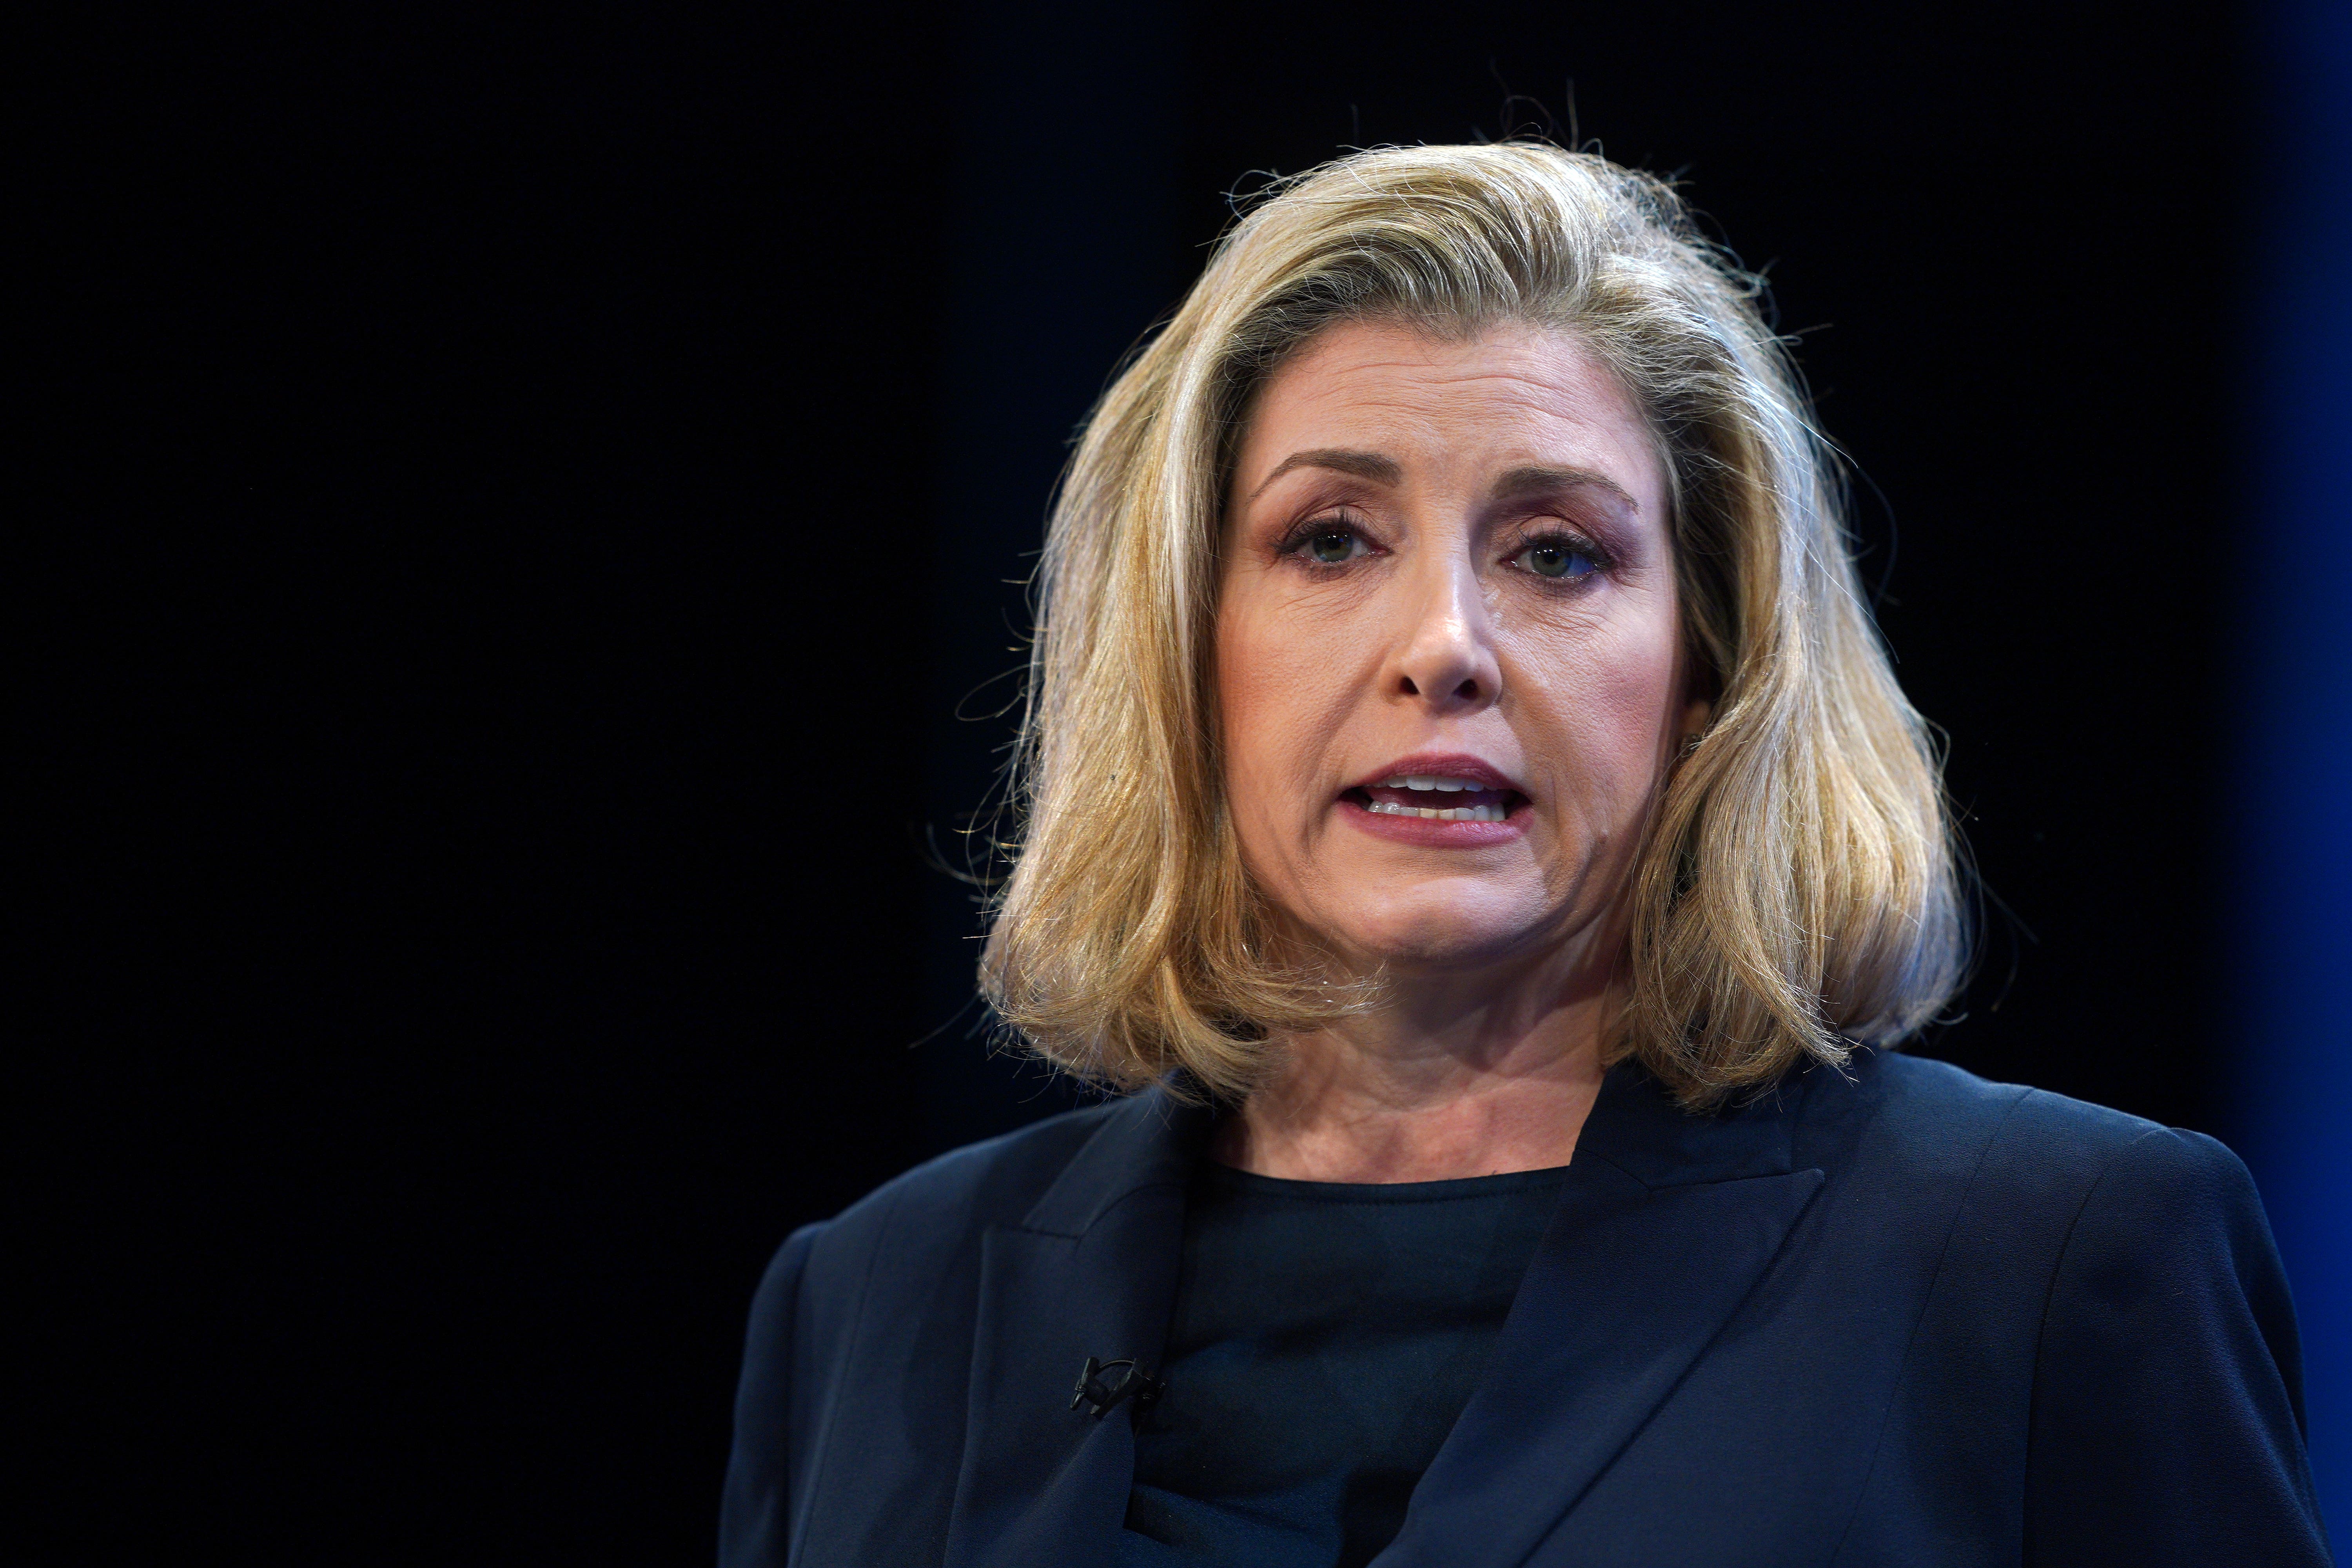 Leader of the House of Commons Penny Mordaunt has been rumoured as a potential Conservative leadership contender